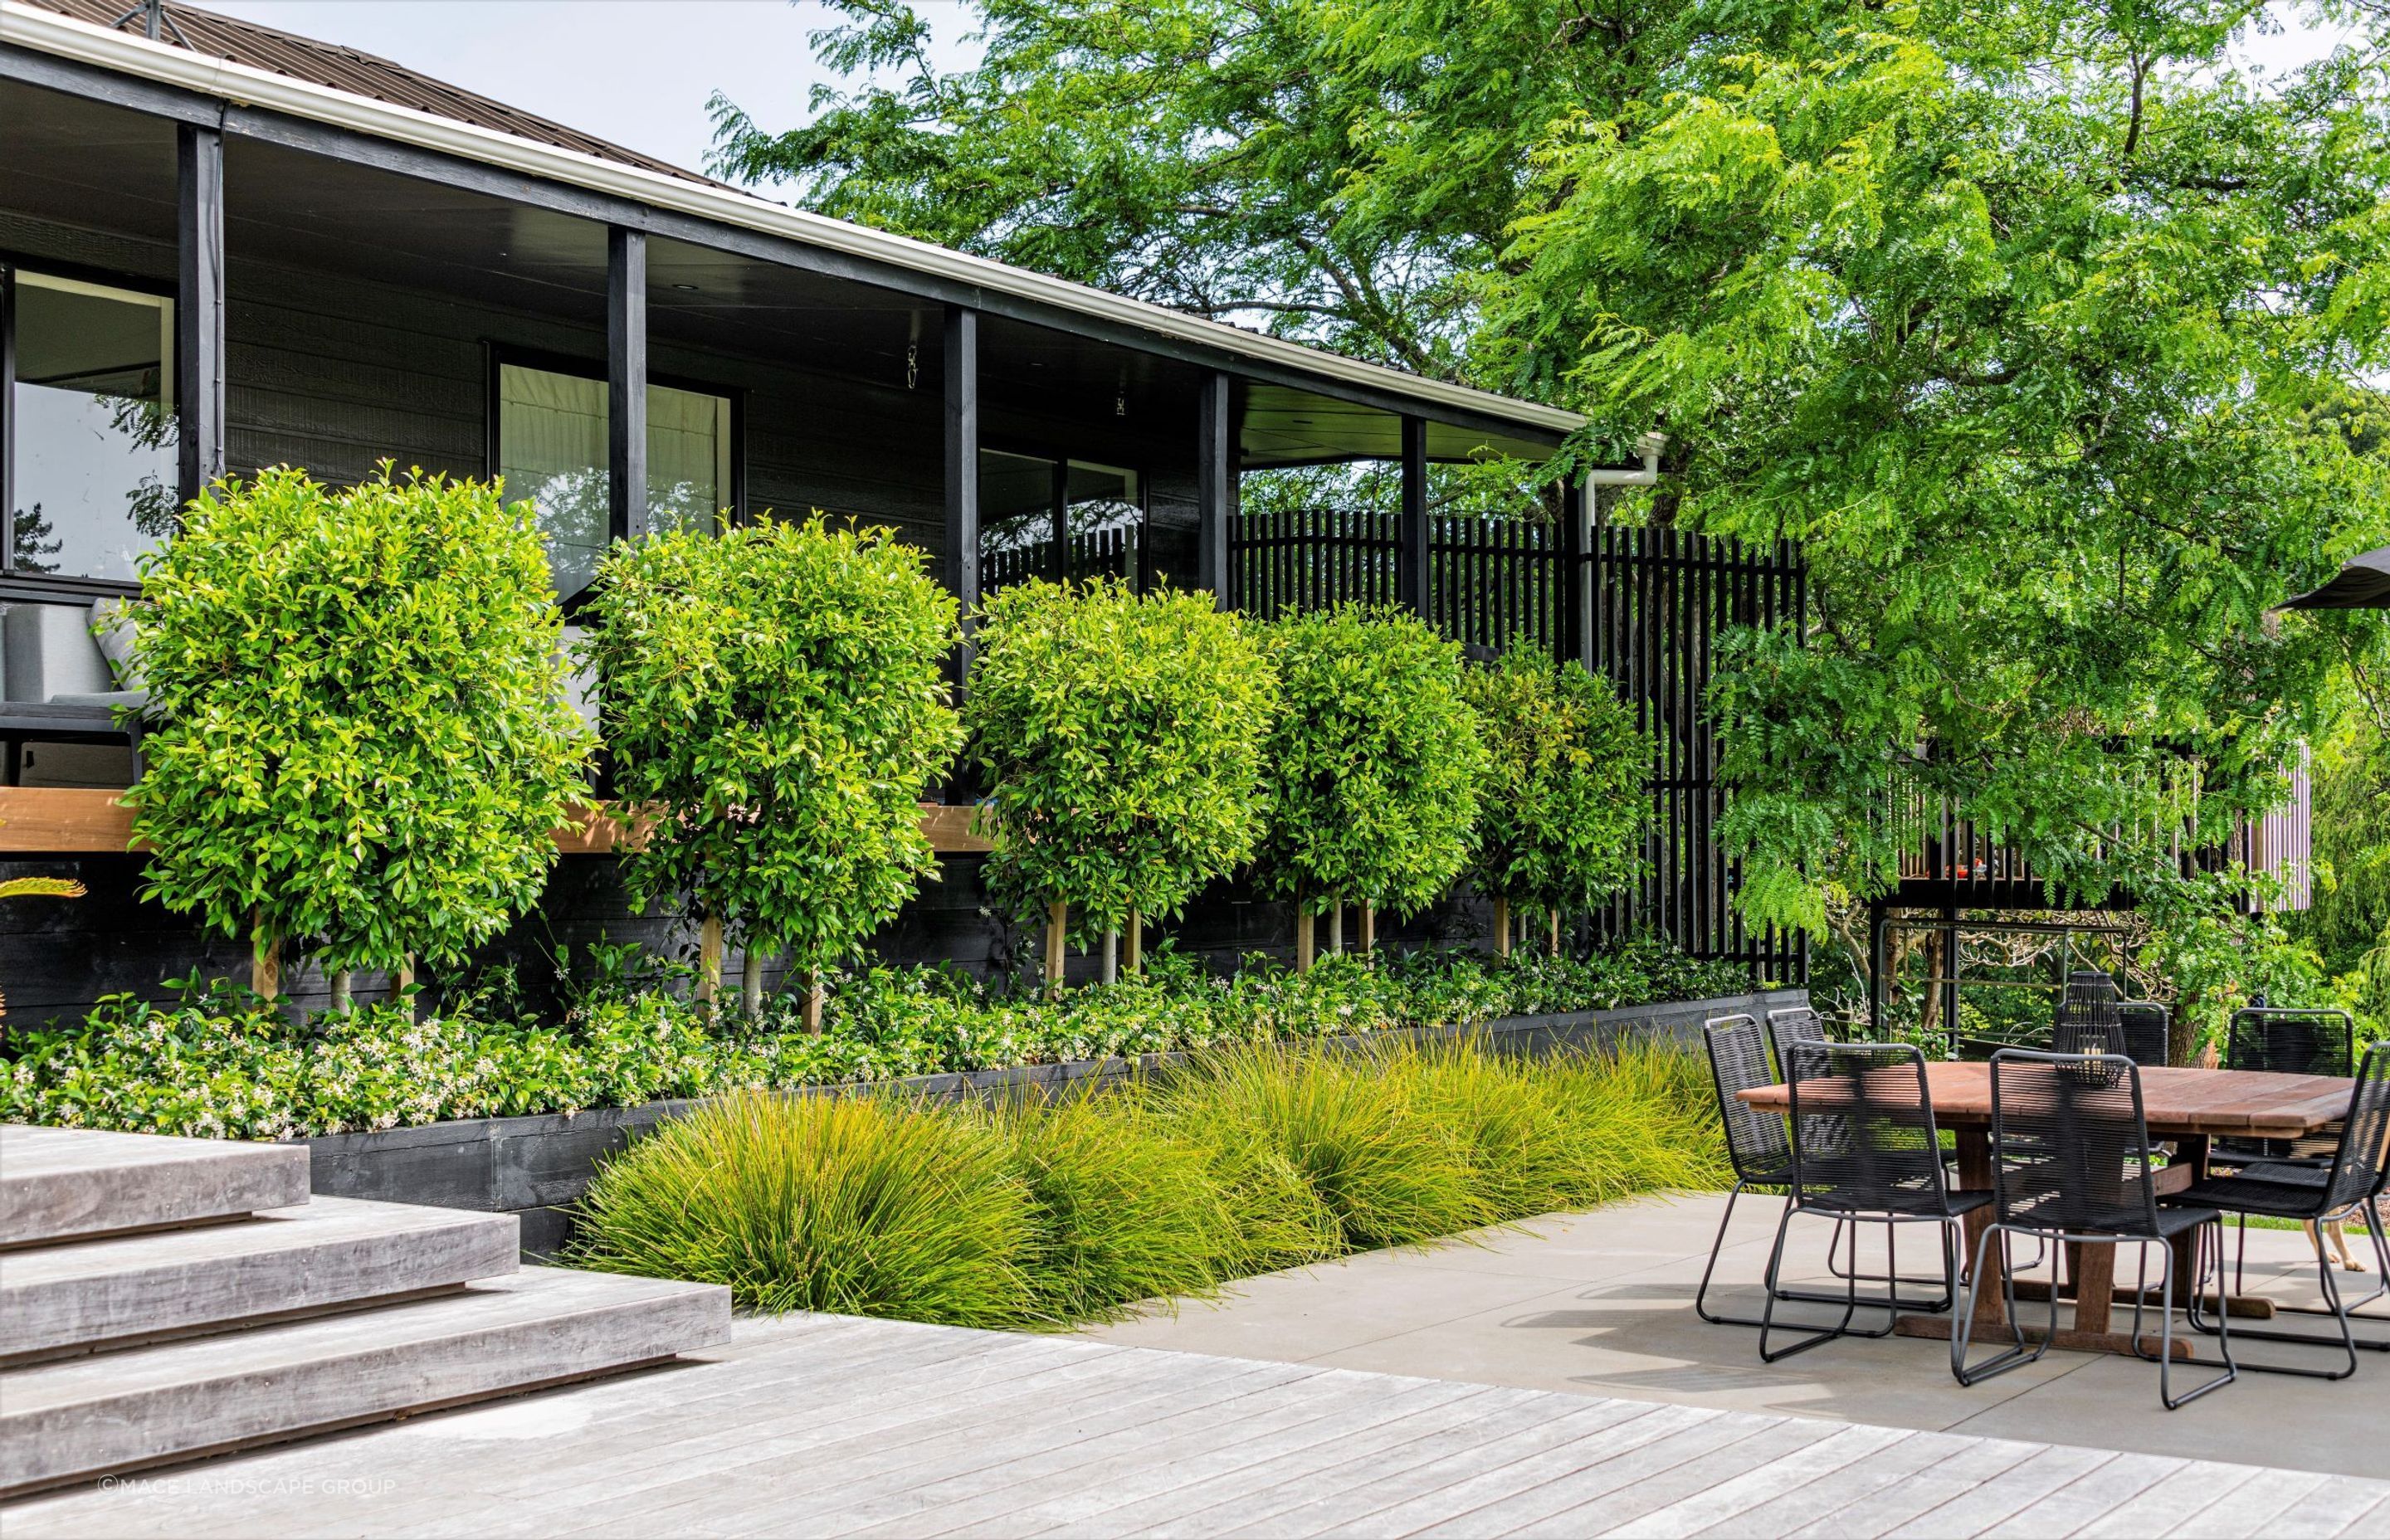 A garden that embraces layered planting has more visual interest and depth, seen here in this wonderful Ardmore garden.